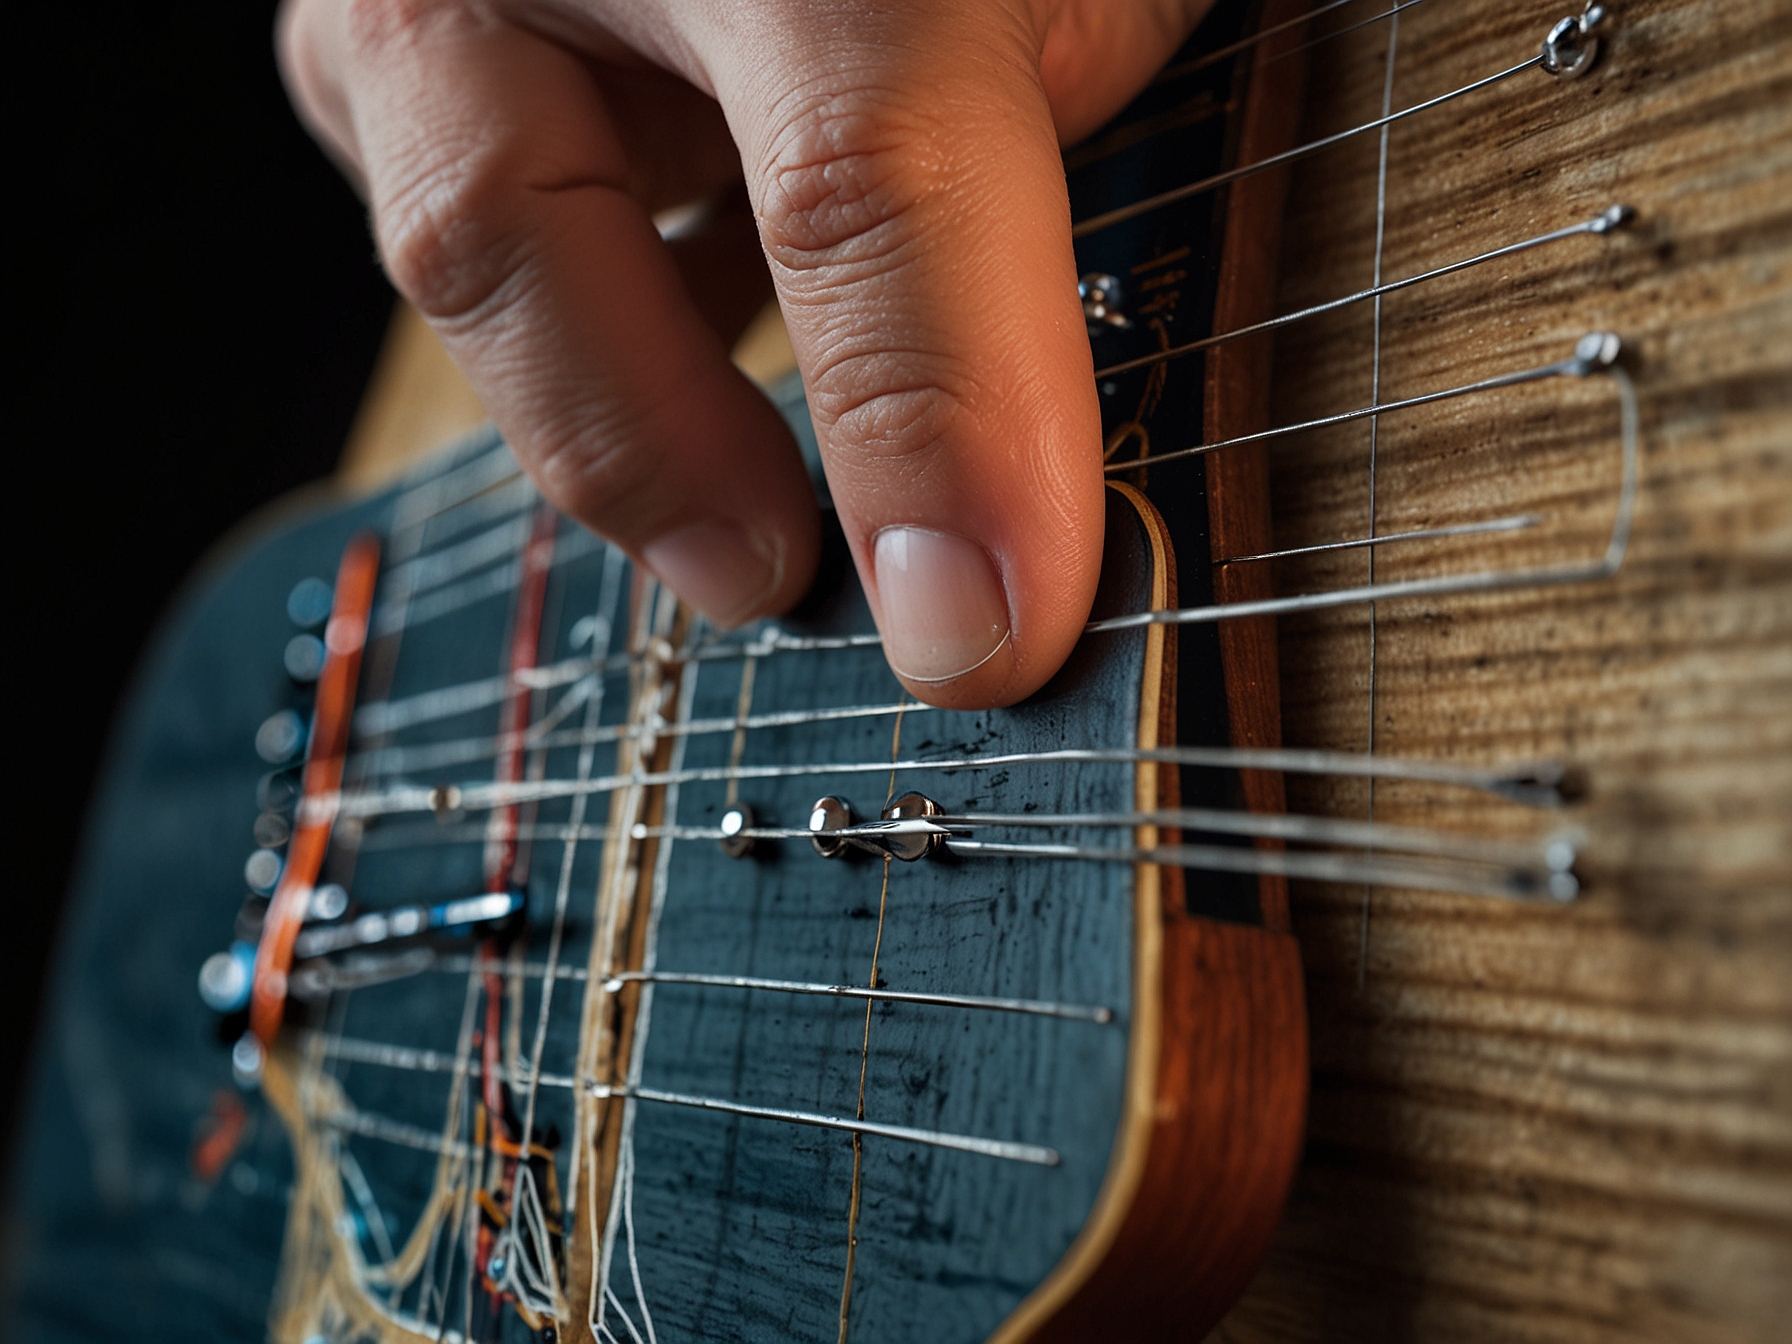 A guitarist's hand demonstrating the spider exercise on the guitar fretboard, with fingers placed on different frets of adjacent strings, highlighting the arachnid-like finger movements.